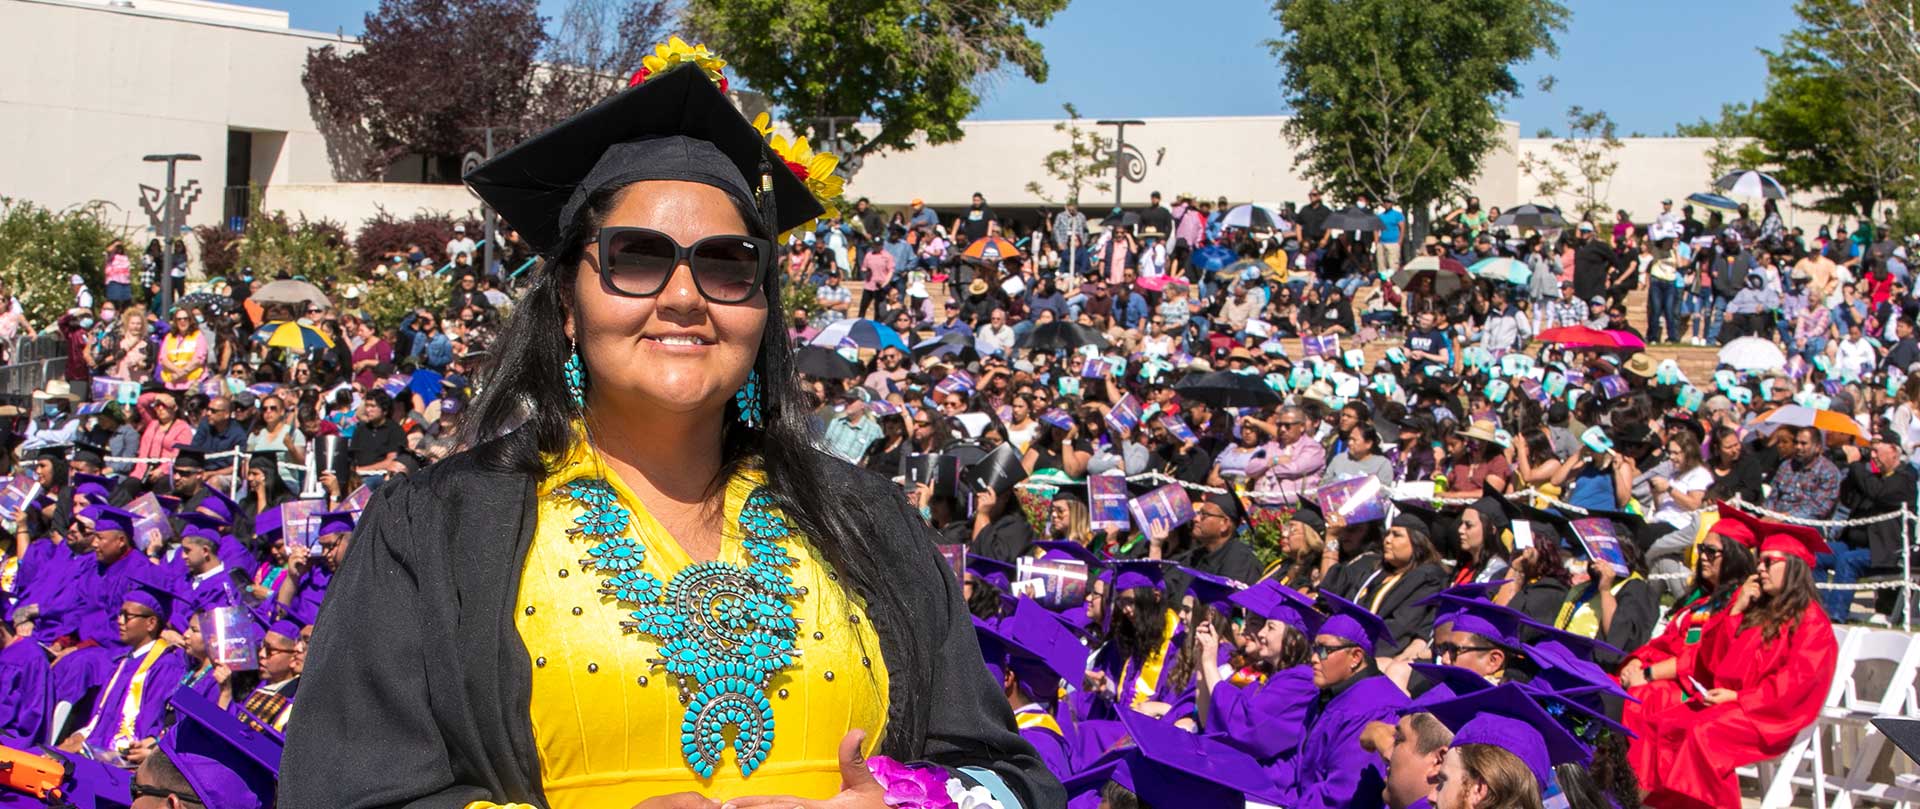 SJC Graduate wearing cap, sunglasses, and  native jewelry smiling at camera with graduates in background